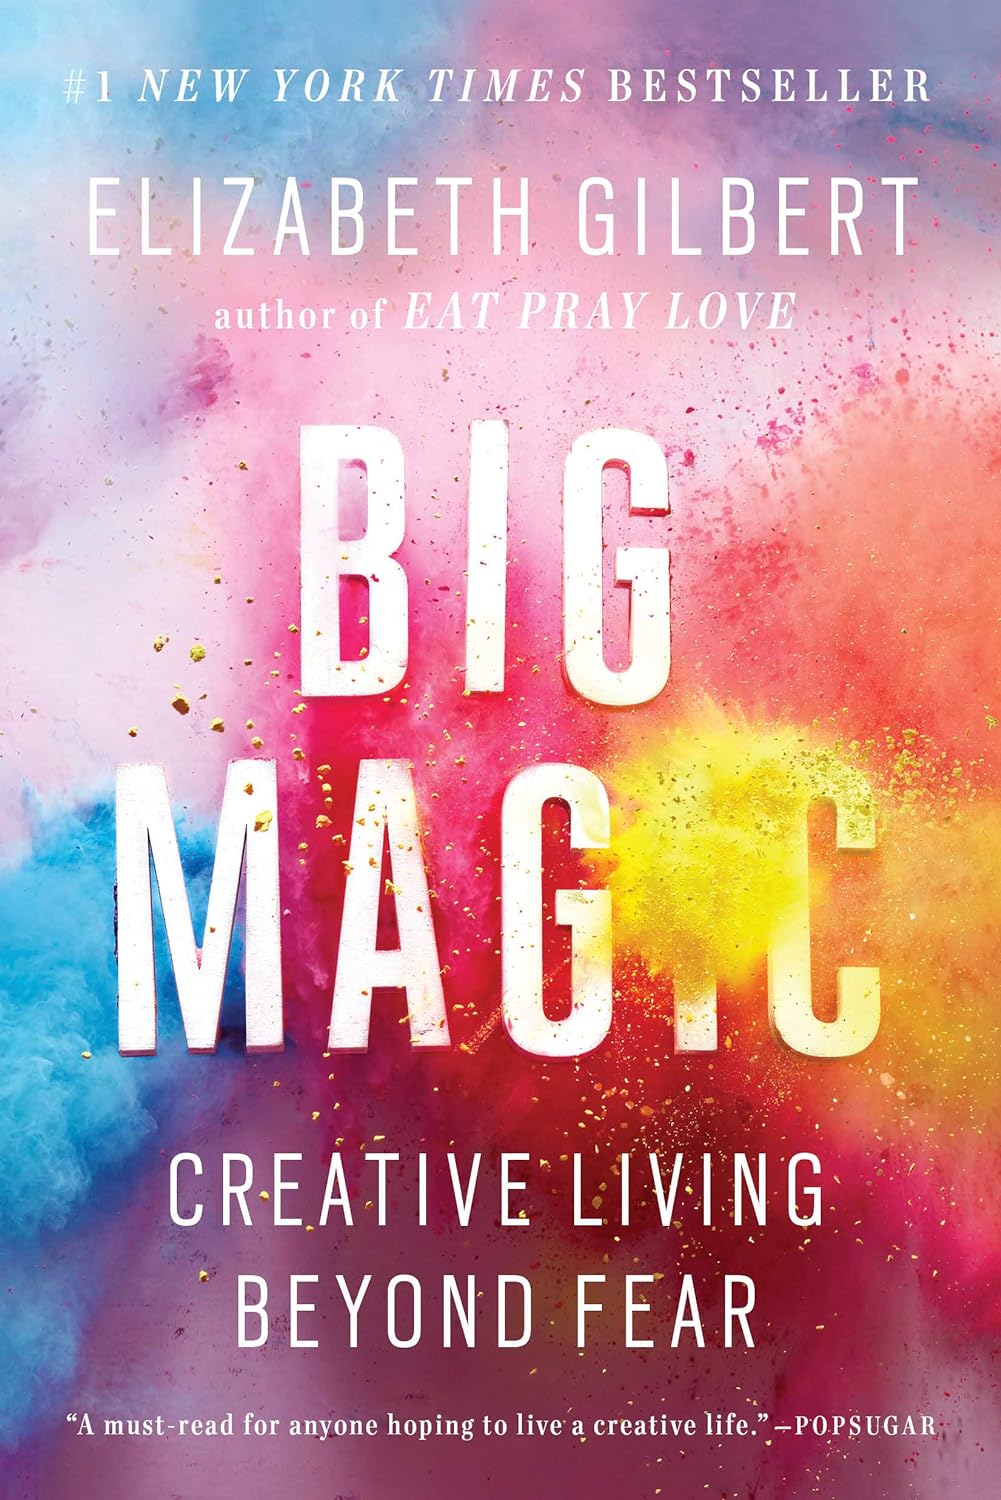 Big Magic by Elizabeth Gilbert. - Motivational Books for the New Year